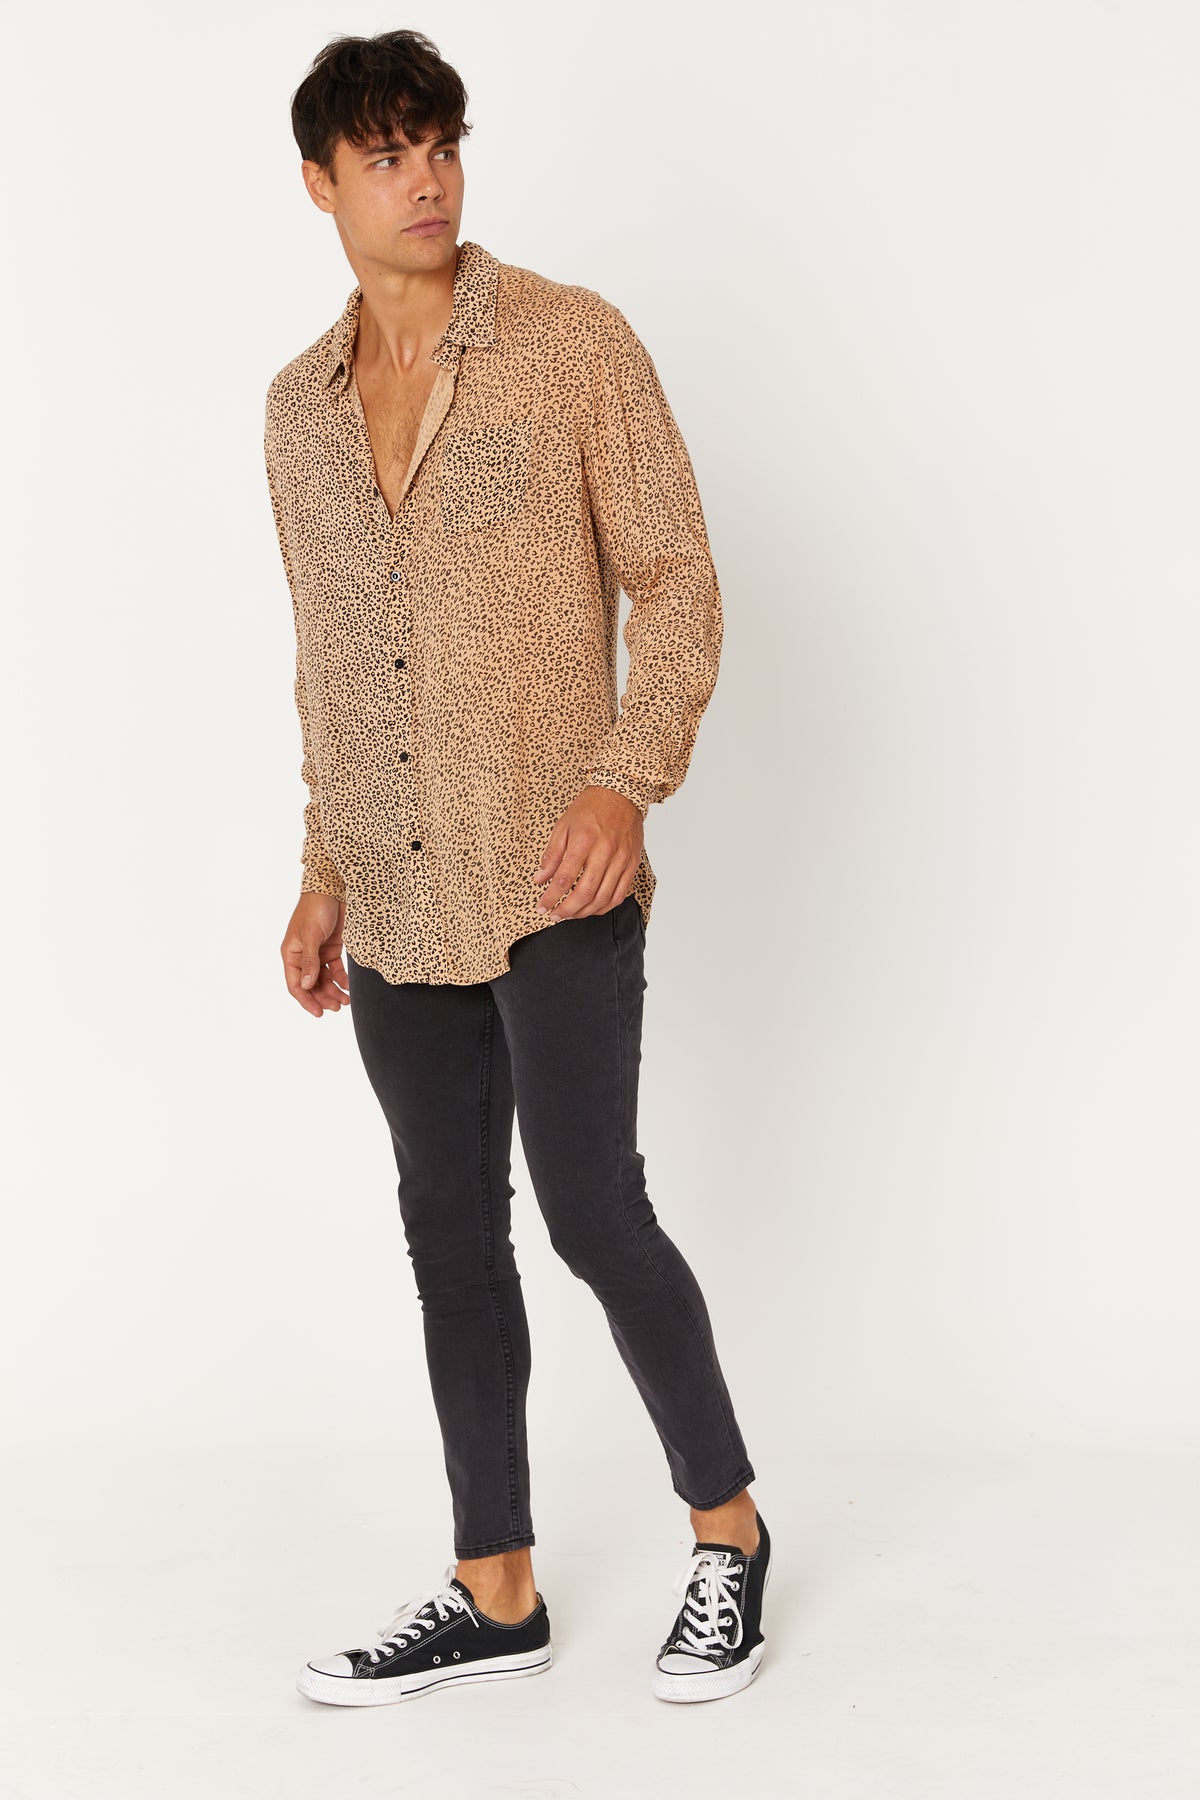 Jack Boating Button Up Long Sleeve Shirt Rayon Leopard